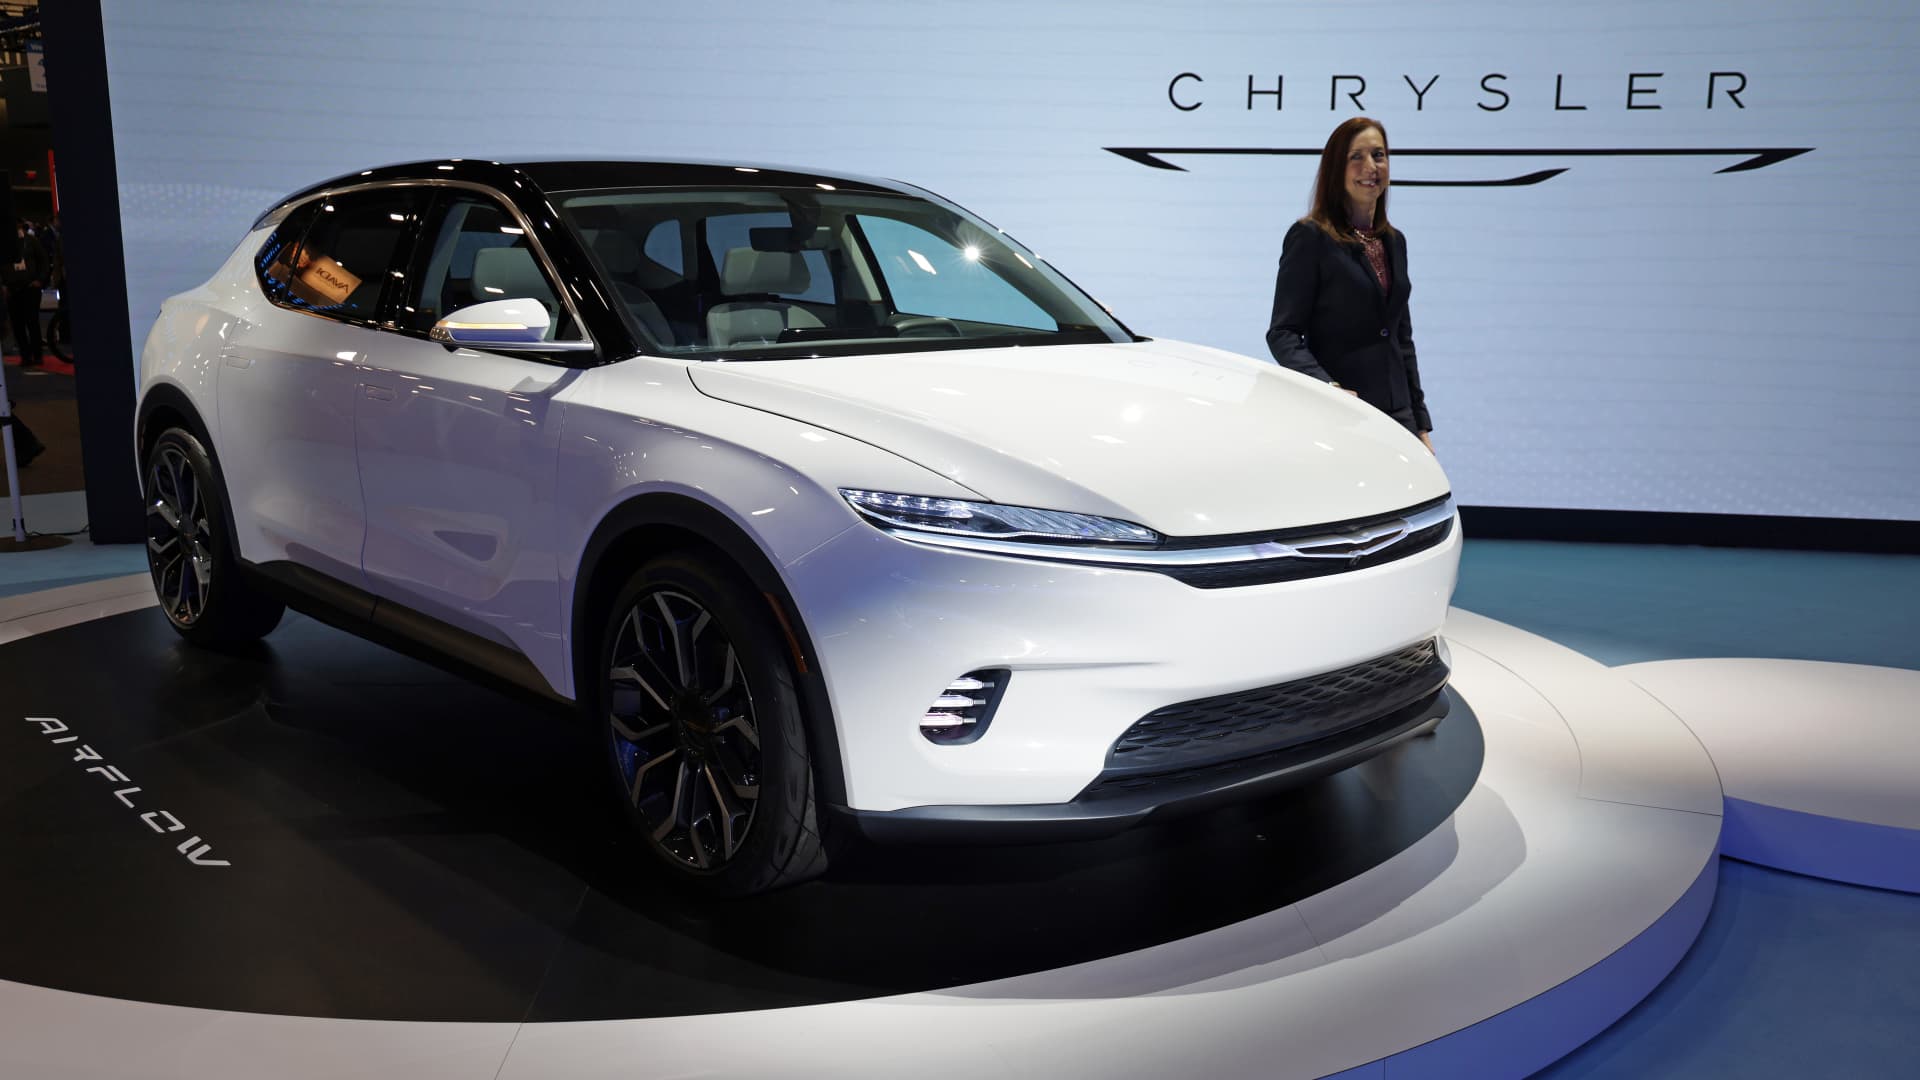 Chris Feuell, CEO of Chrysler brand of Stellantis, introduces the all-electric Chrysler Airflow Concept vehicle during a Stellantis press event at CES 2022 at the Las Vegas Convention Center on January 5, 2022 in Las Vegas, Nevada.